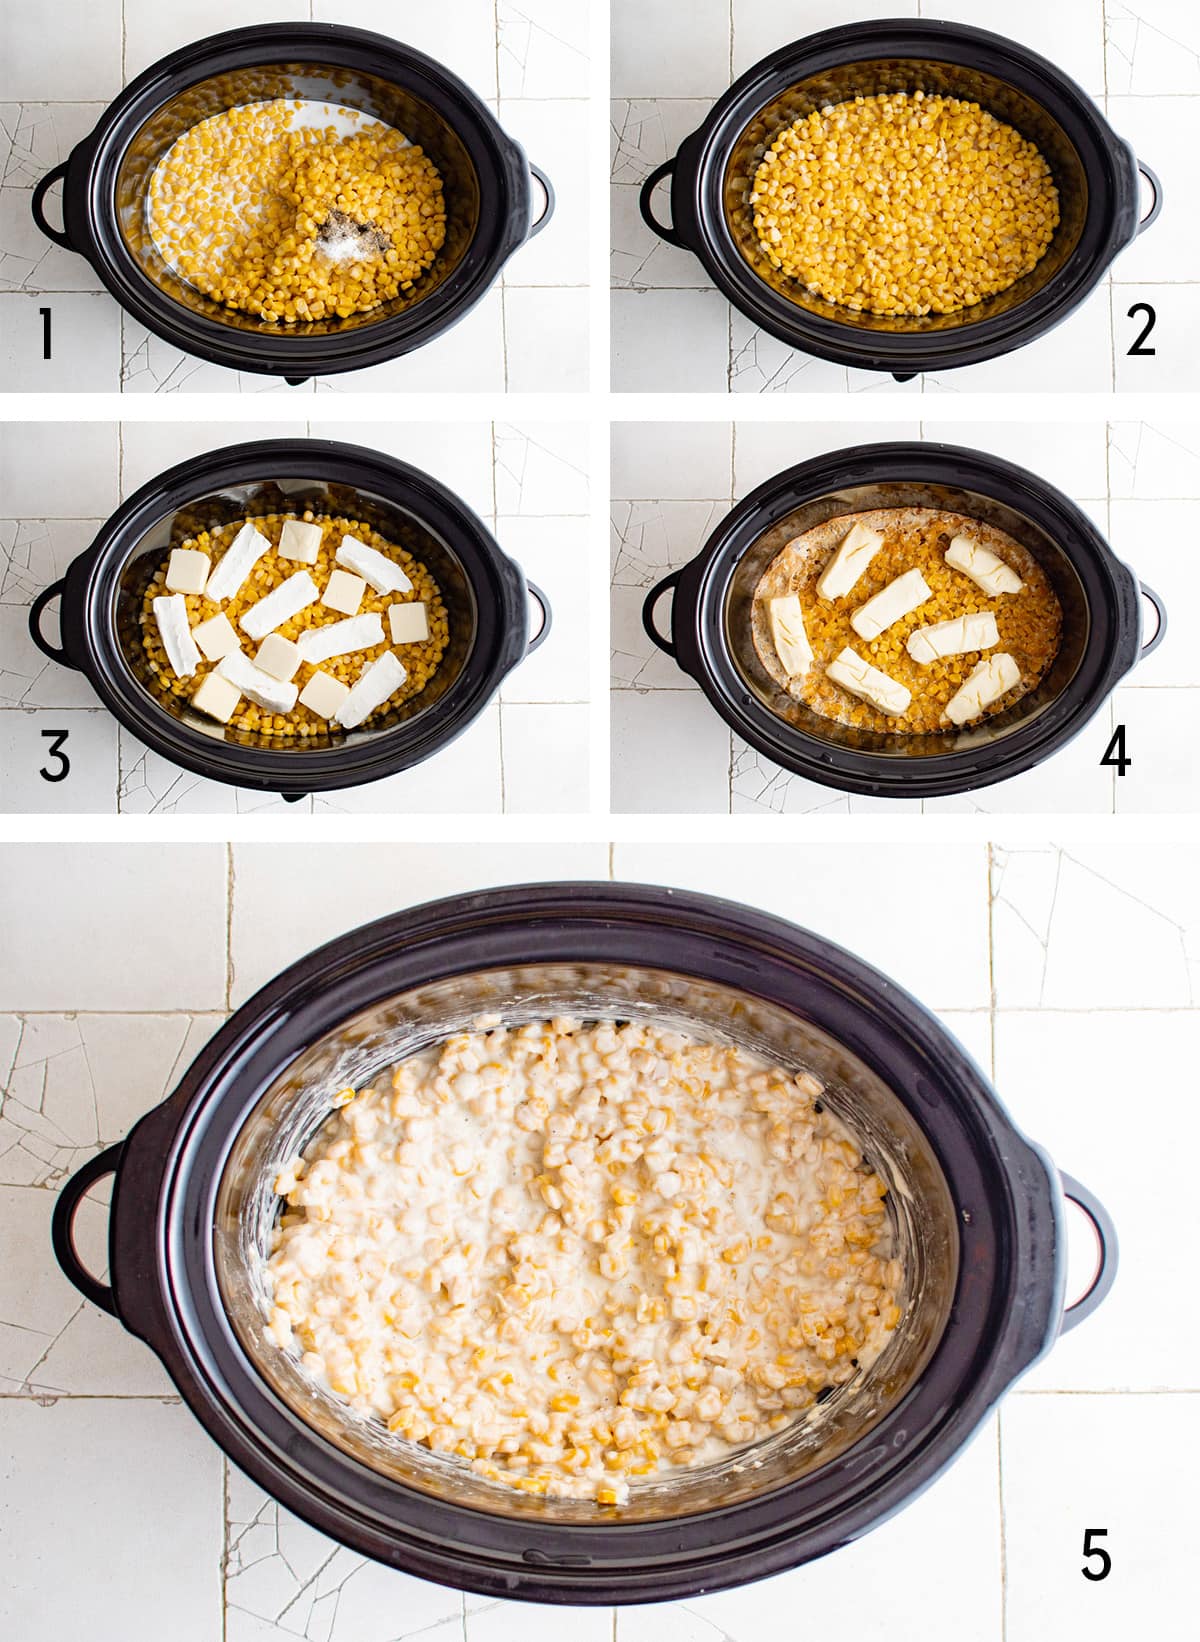 Collage of images depicting the steps for making slow cooker cream style corn. 